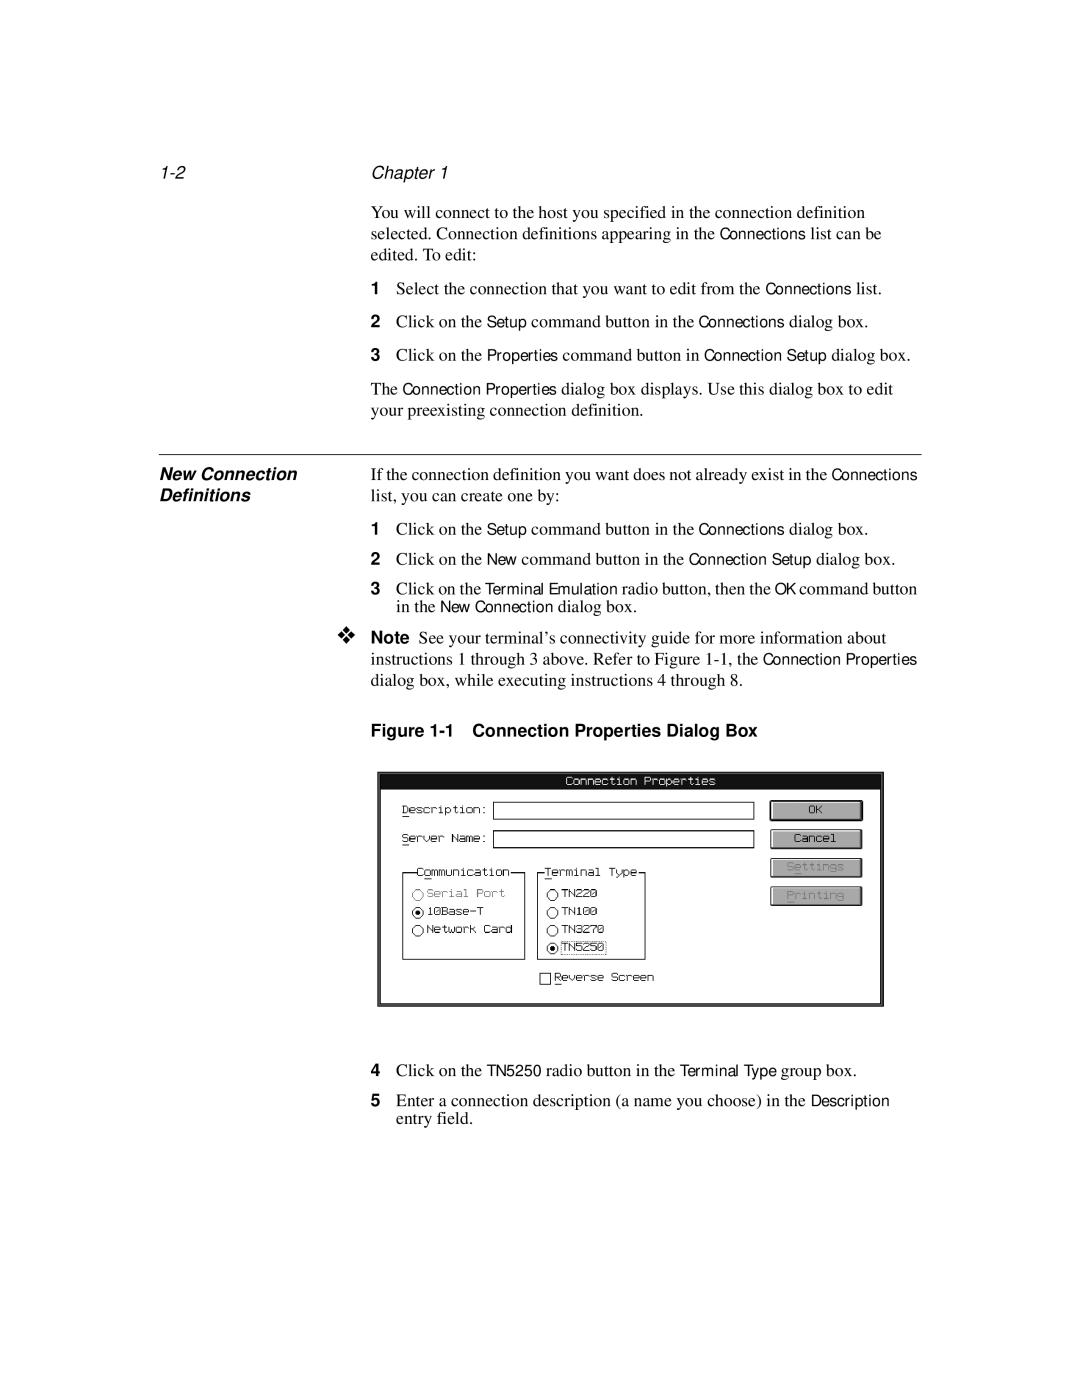 IBM TN5250 manual Chapter, New Connection, Definitions, list, you can create one by, 1 Connection Properties Dialog Box 